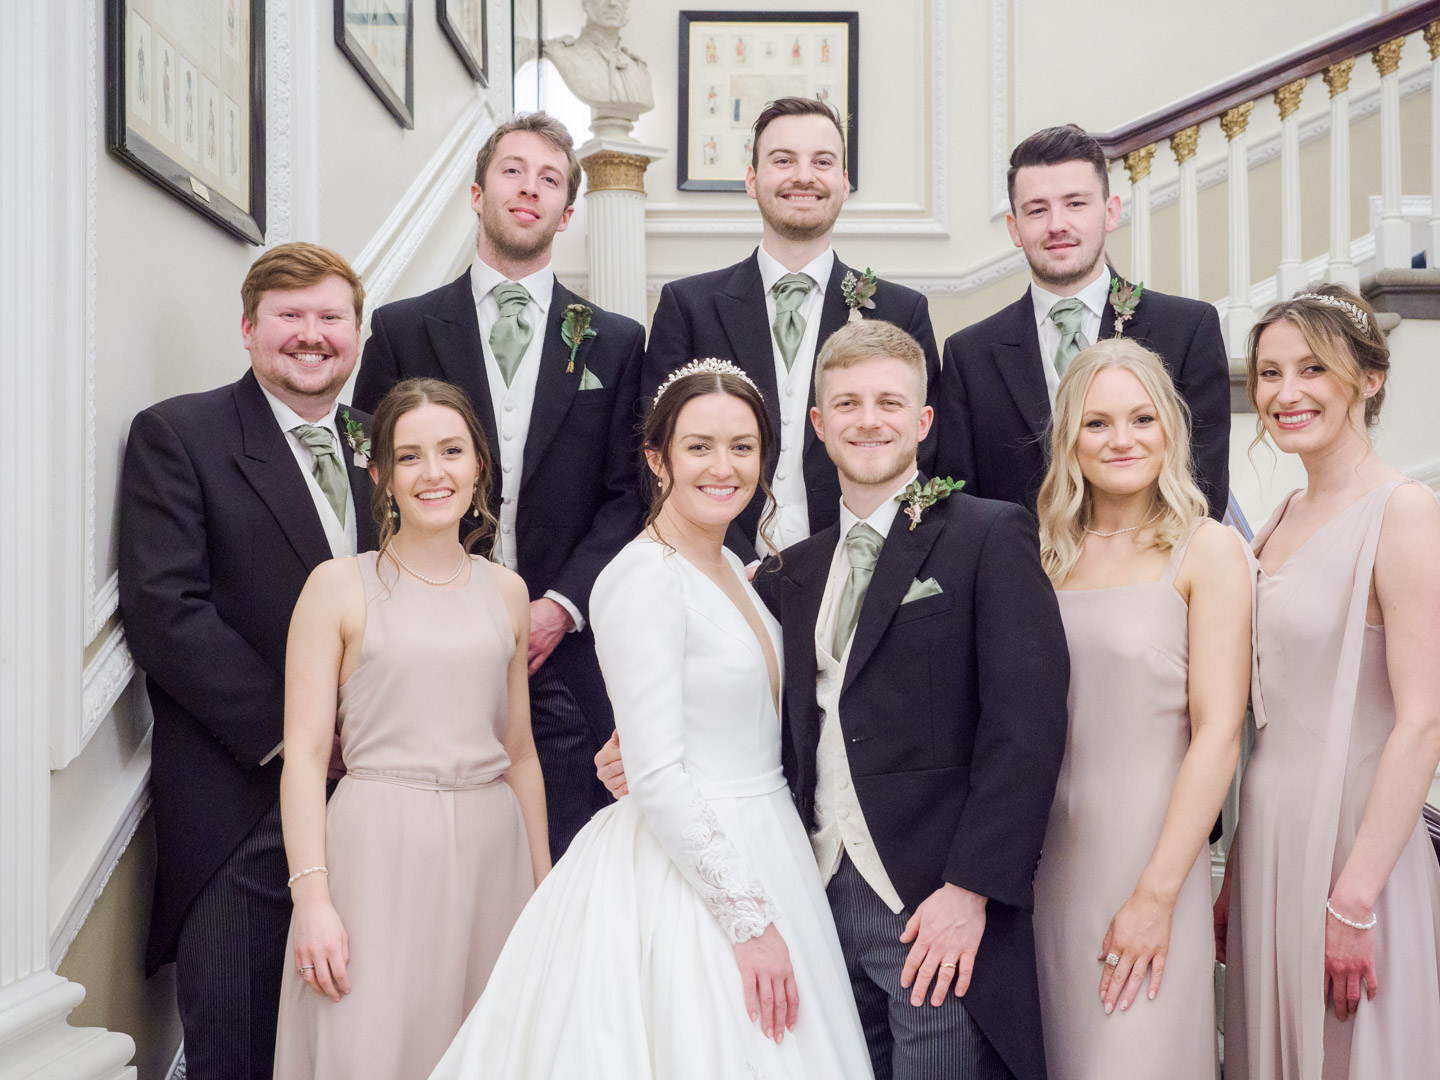 Bride, groom, bridesmaids and ushers on the stairs at the Naval and Military Club